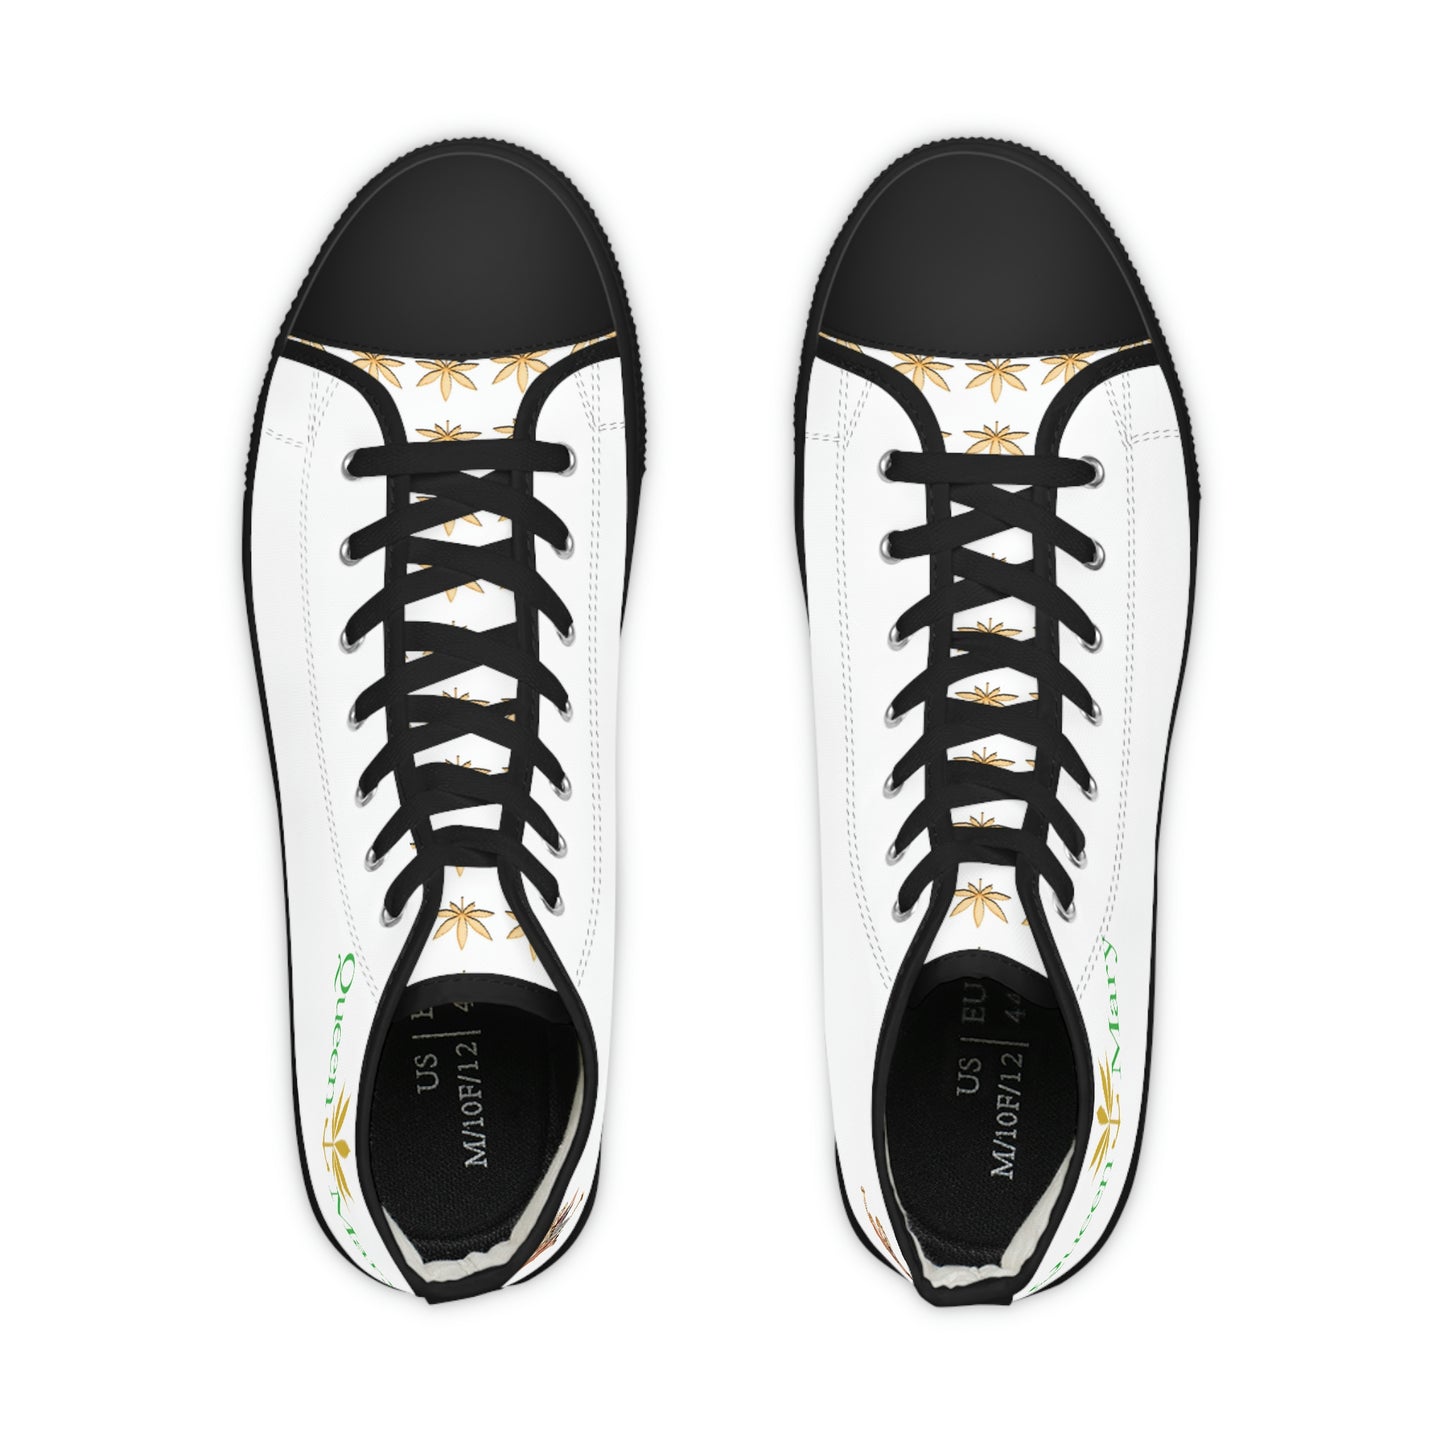 Men's High Top Fashion Sneakers by Queen Mary